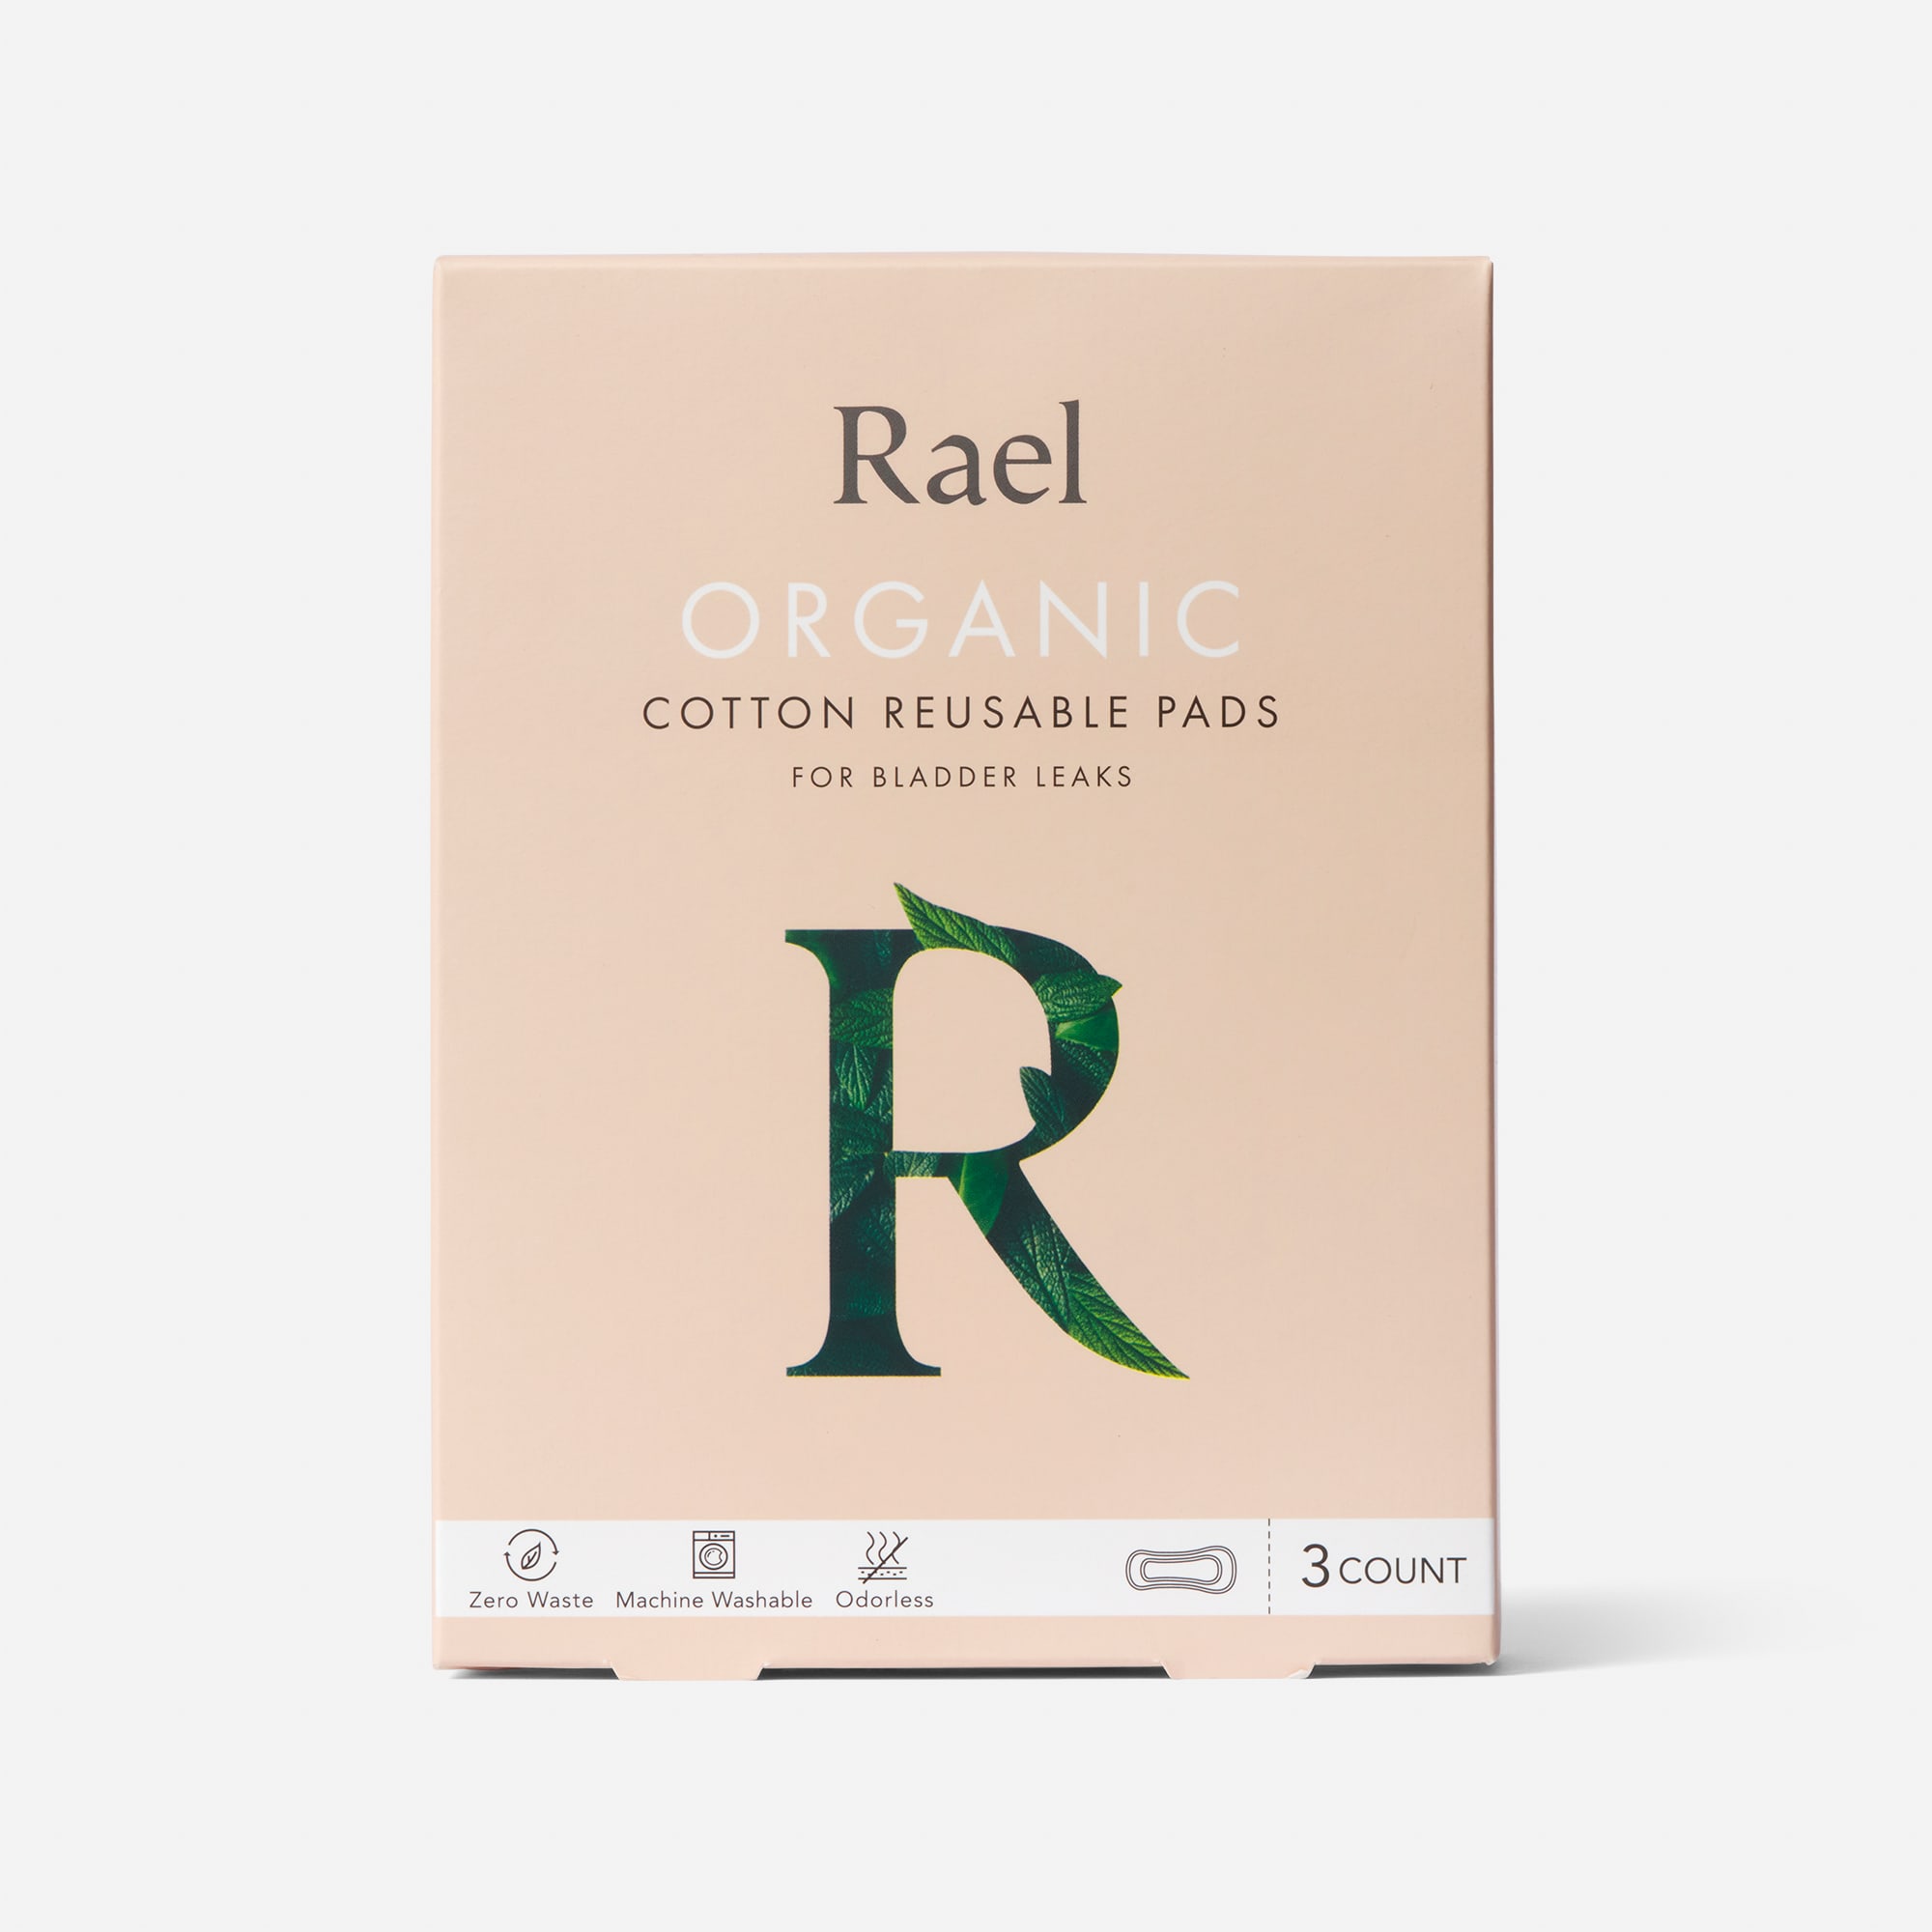 HSA Eligible  Rael Organic Cotton Reusable Pads for Bladder Leaks, 3 ct.